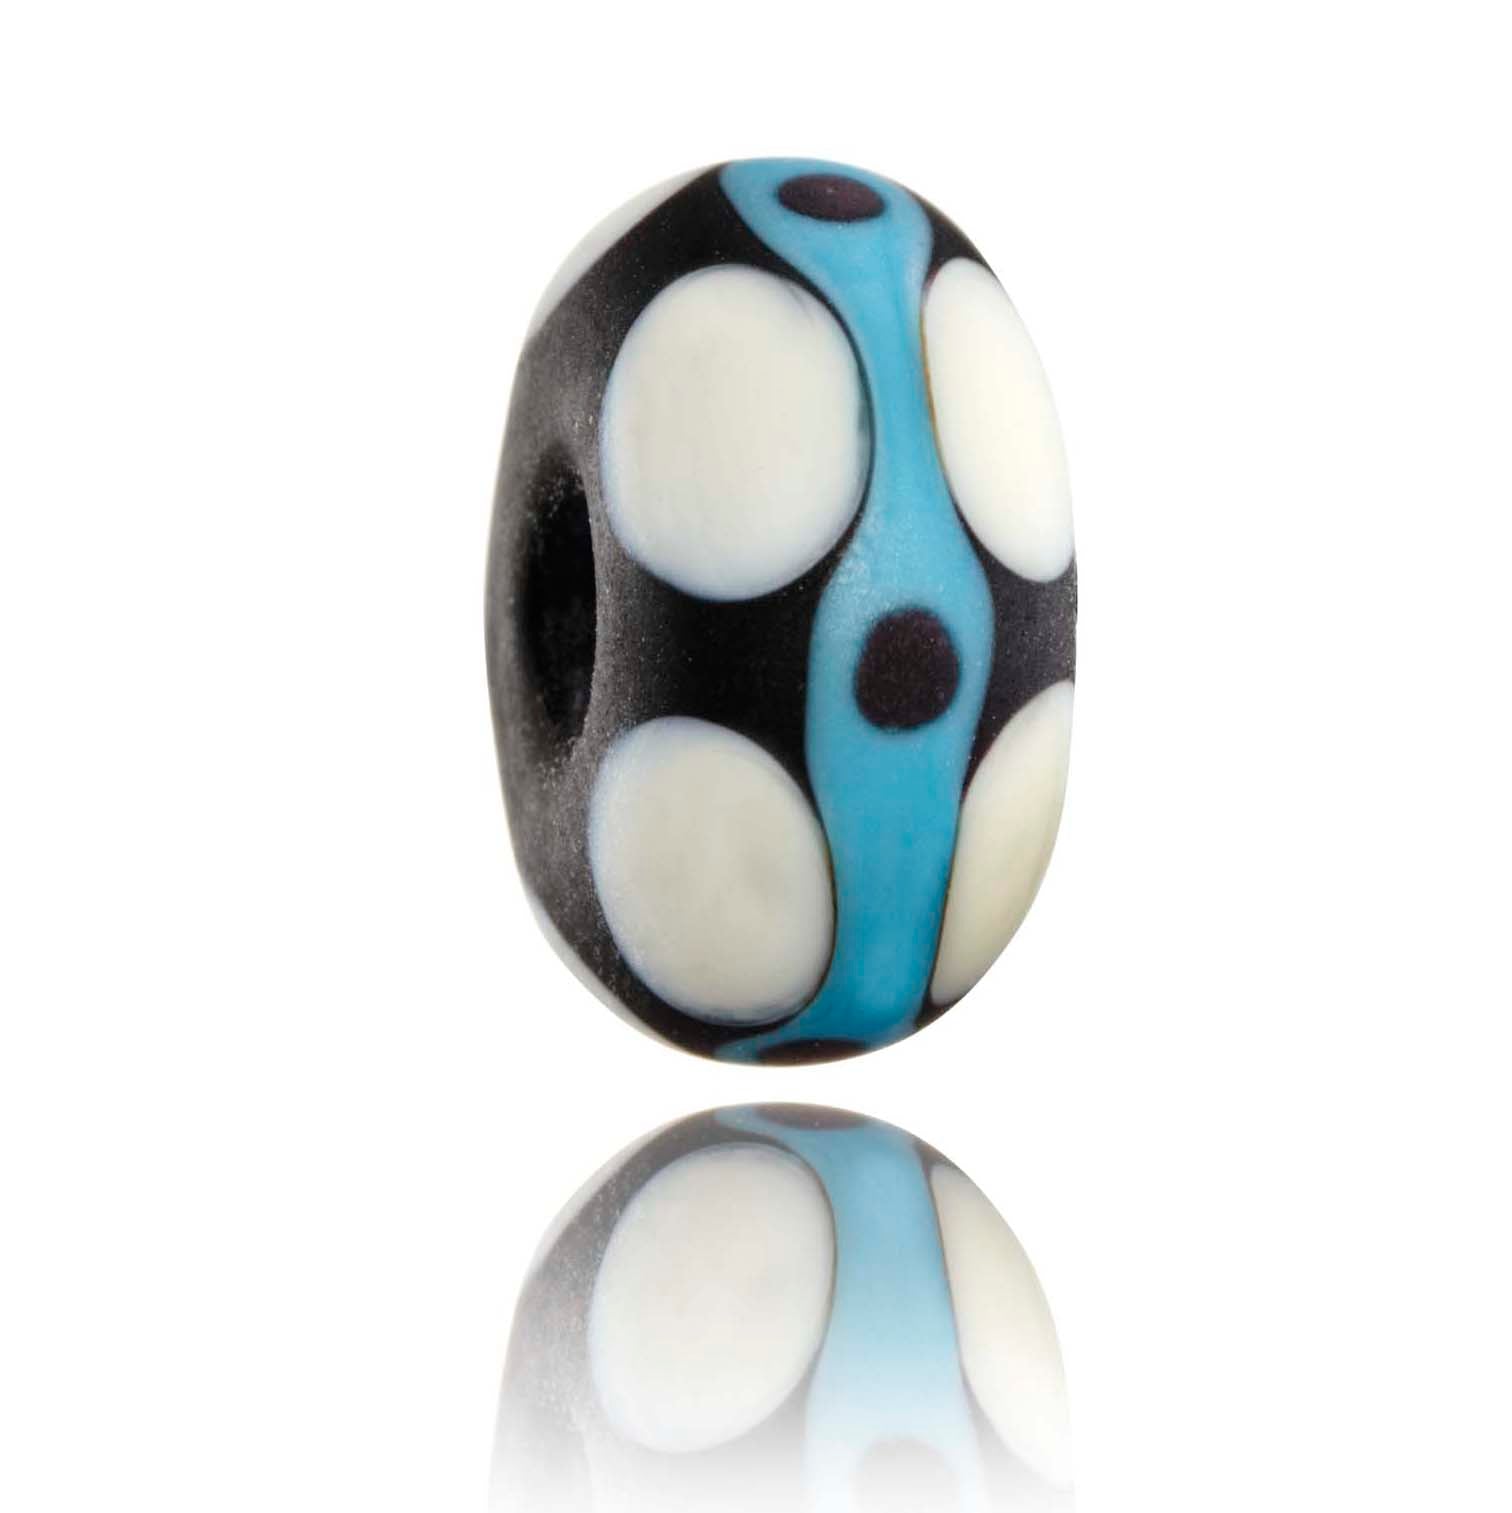 Black matt glass bead with turquoise pattern and white dots on surface for Muriwai, New Zealand.